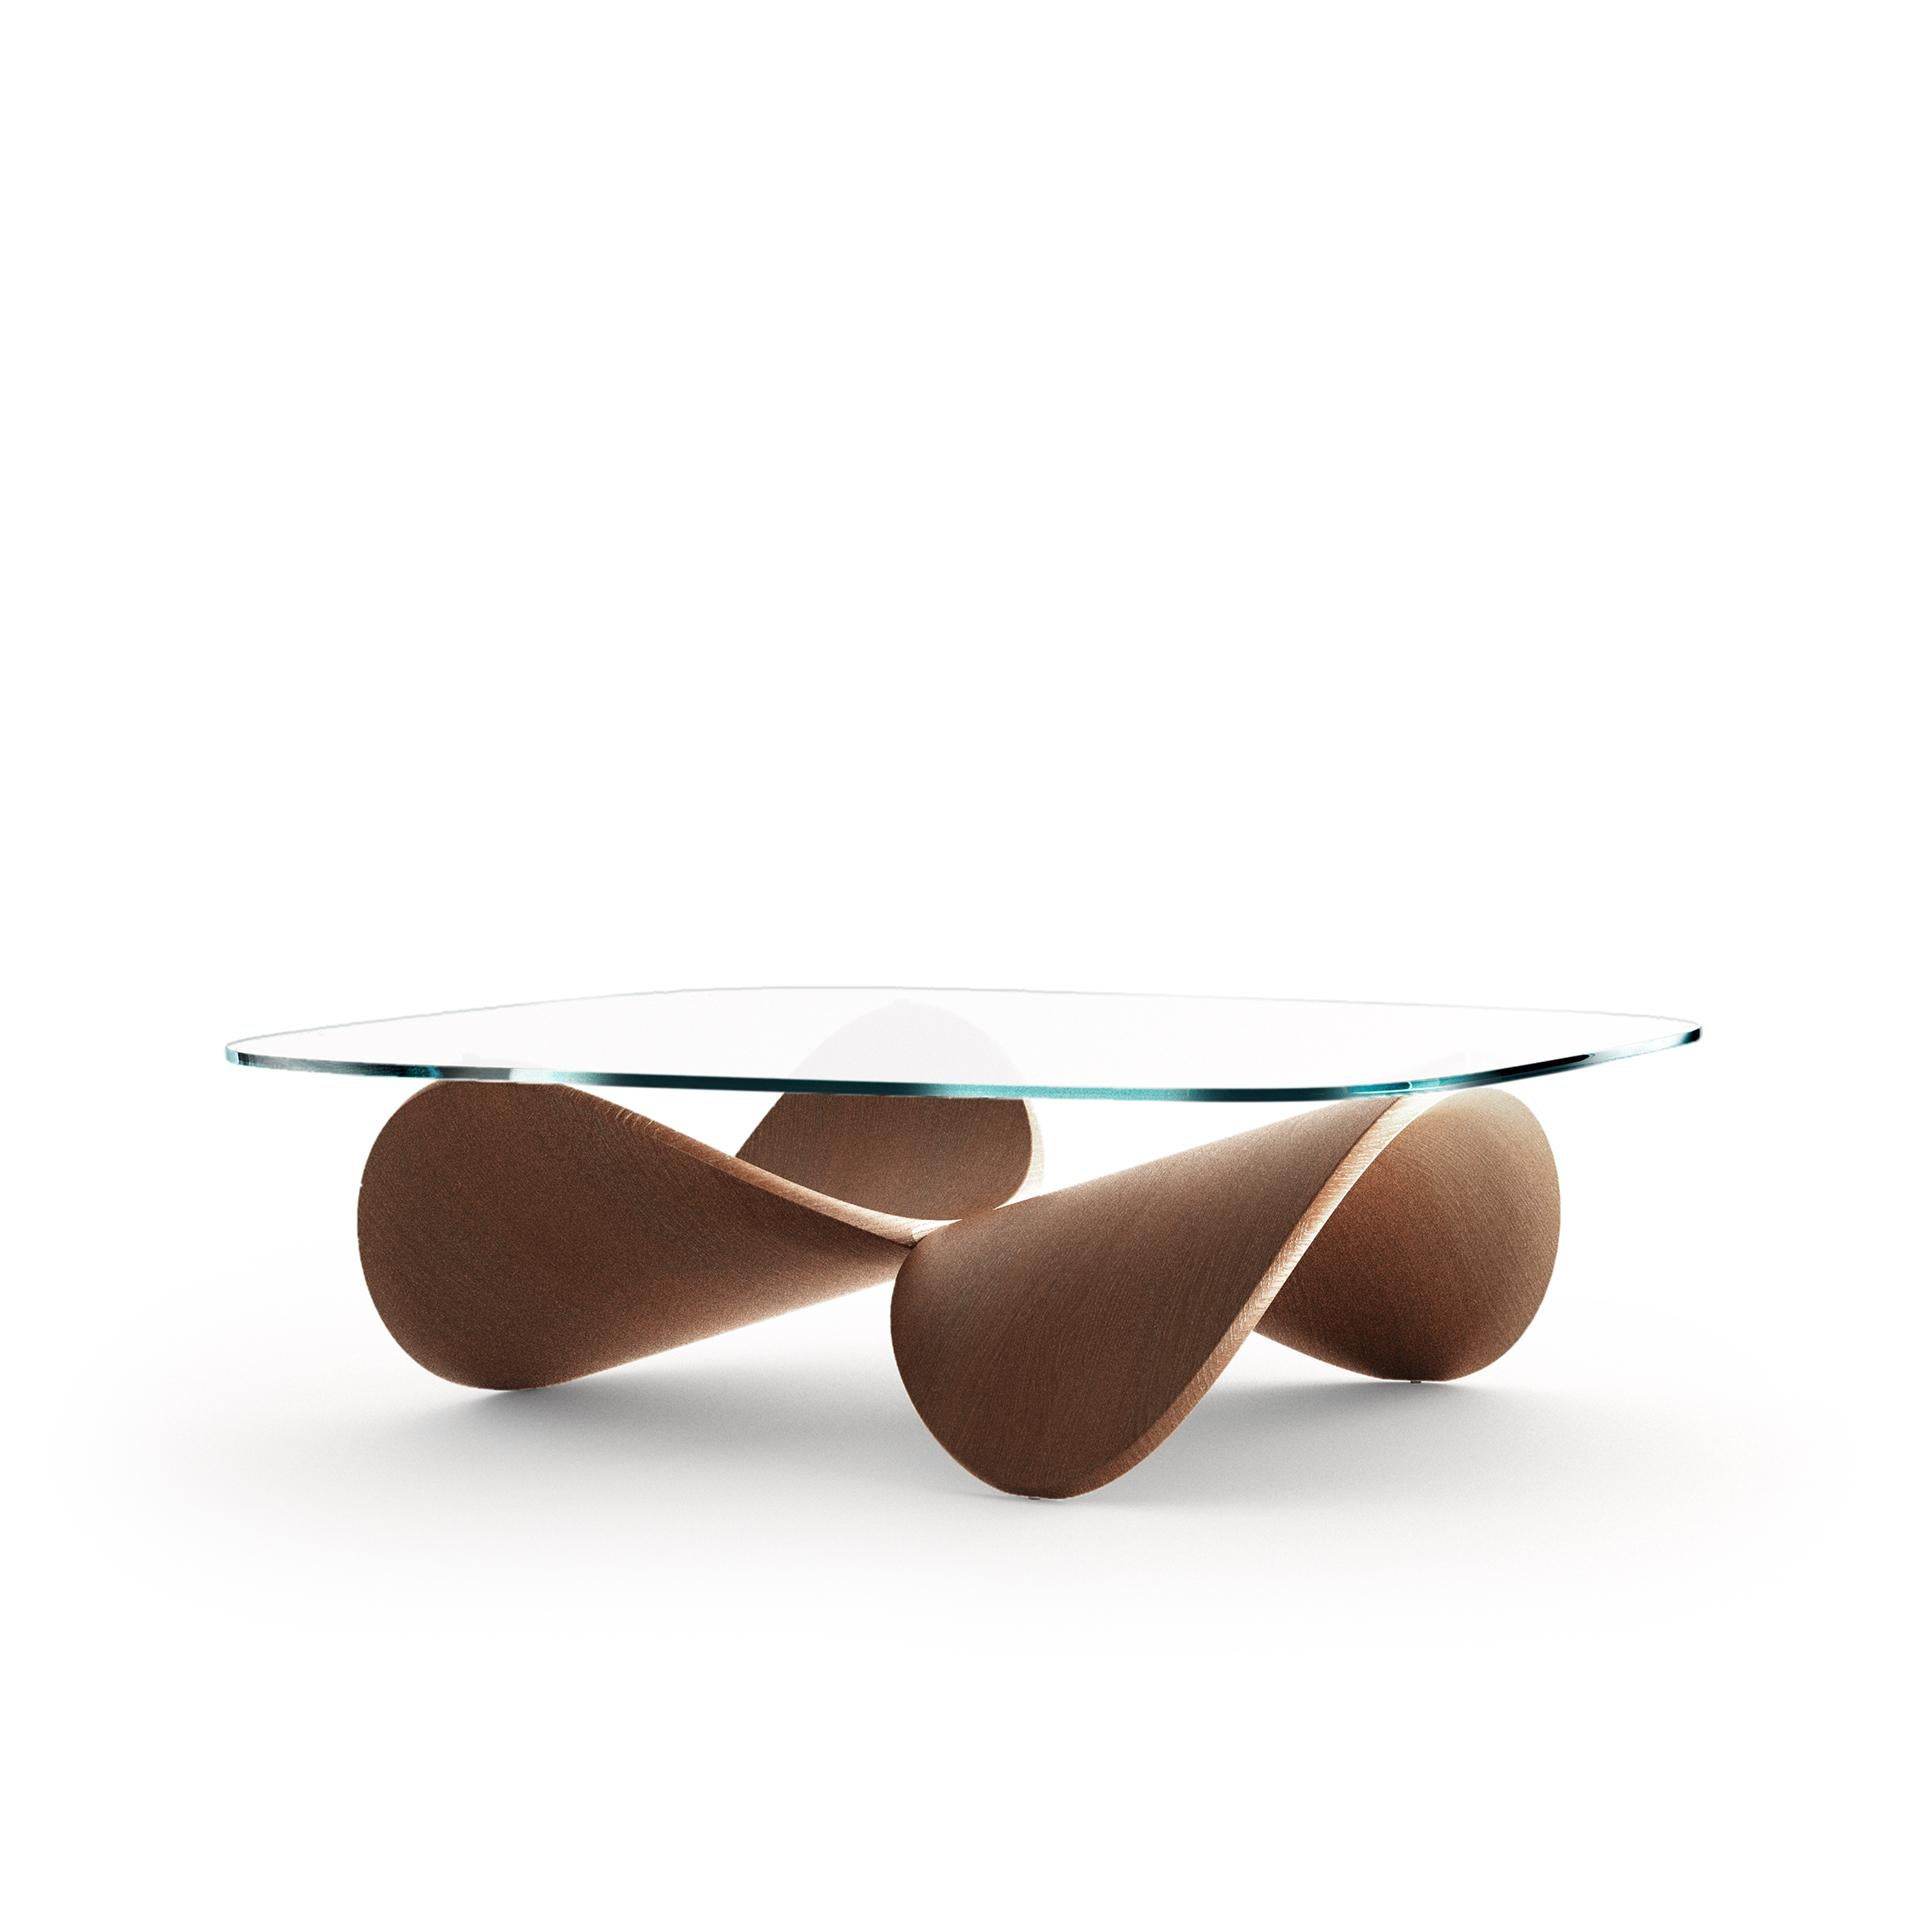 A coffee table that is both furniture and sculpture designed for authentic living spaces. Two identical wooden shells are arranged together in a reversed posture and are joined to create a sculptural structure for the glass top. 
The table was named